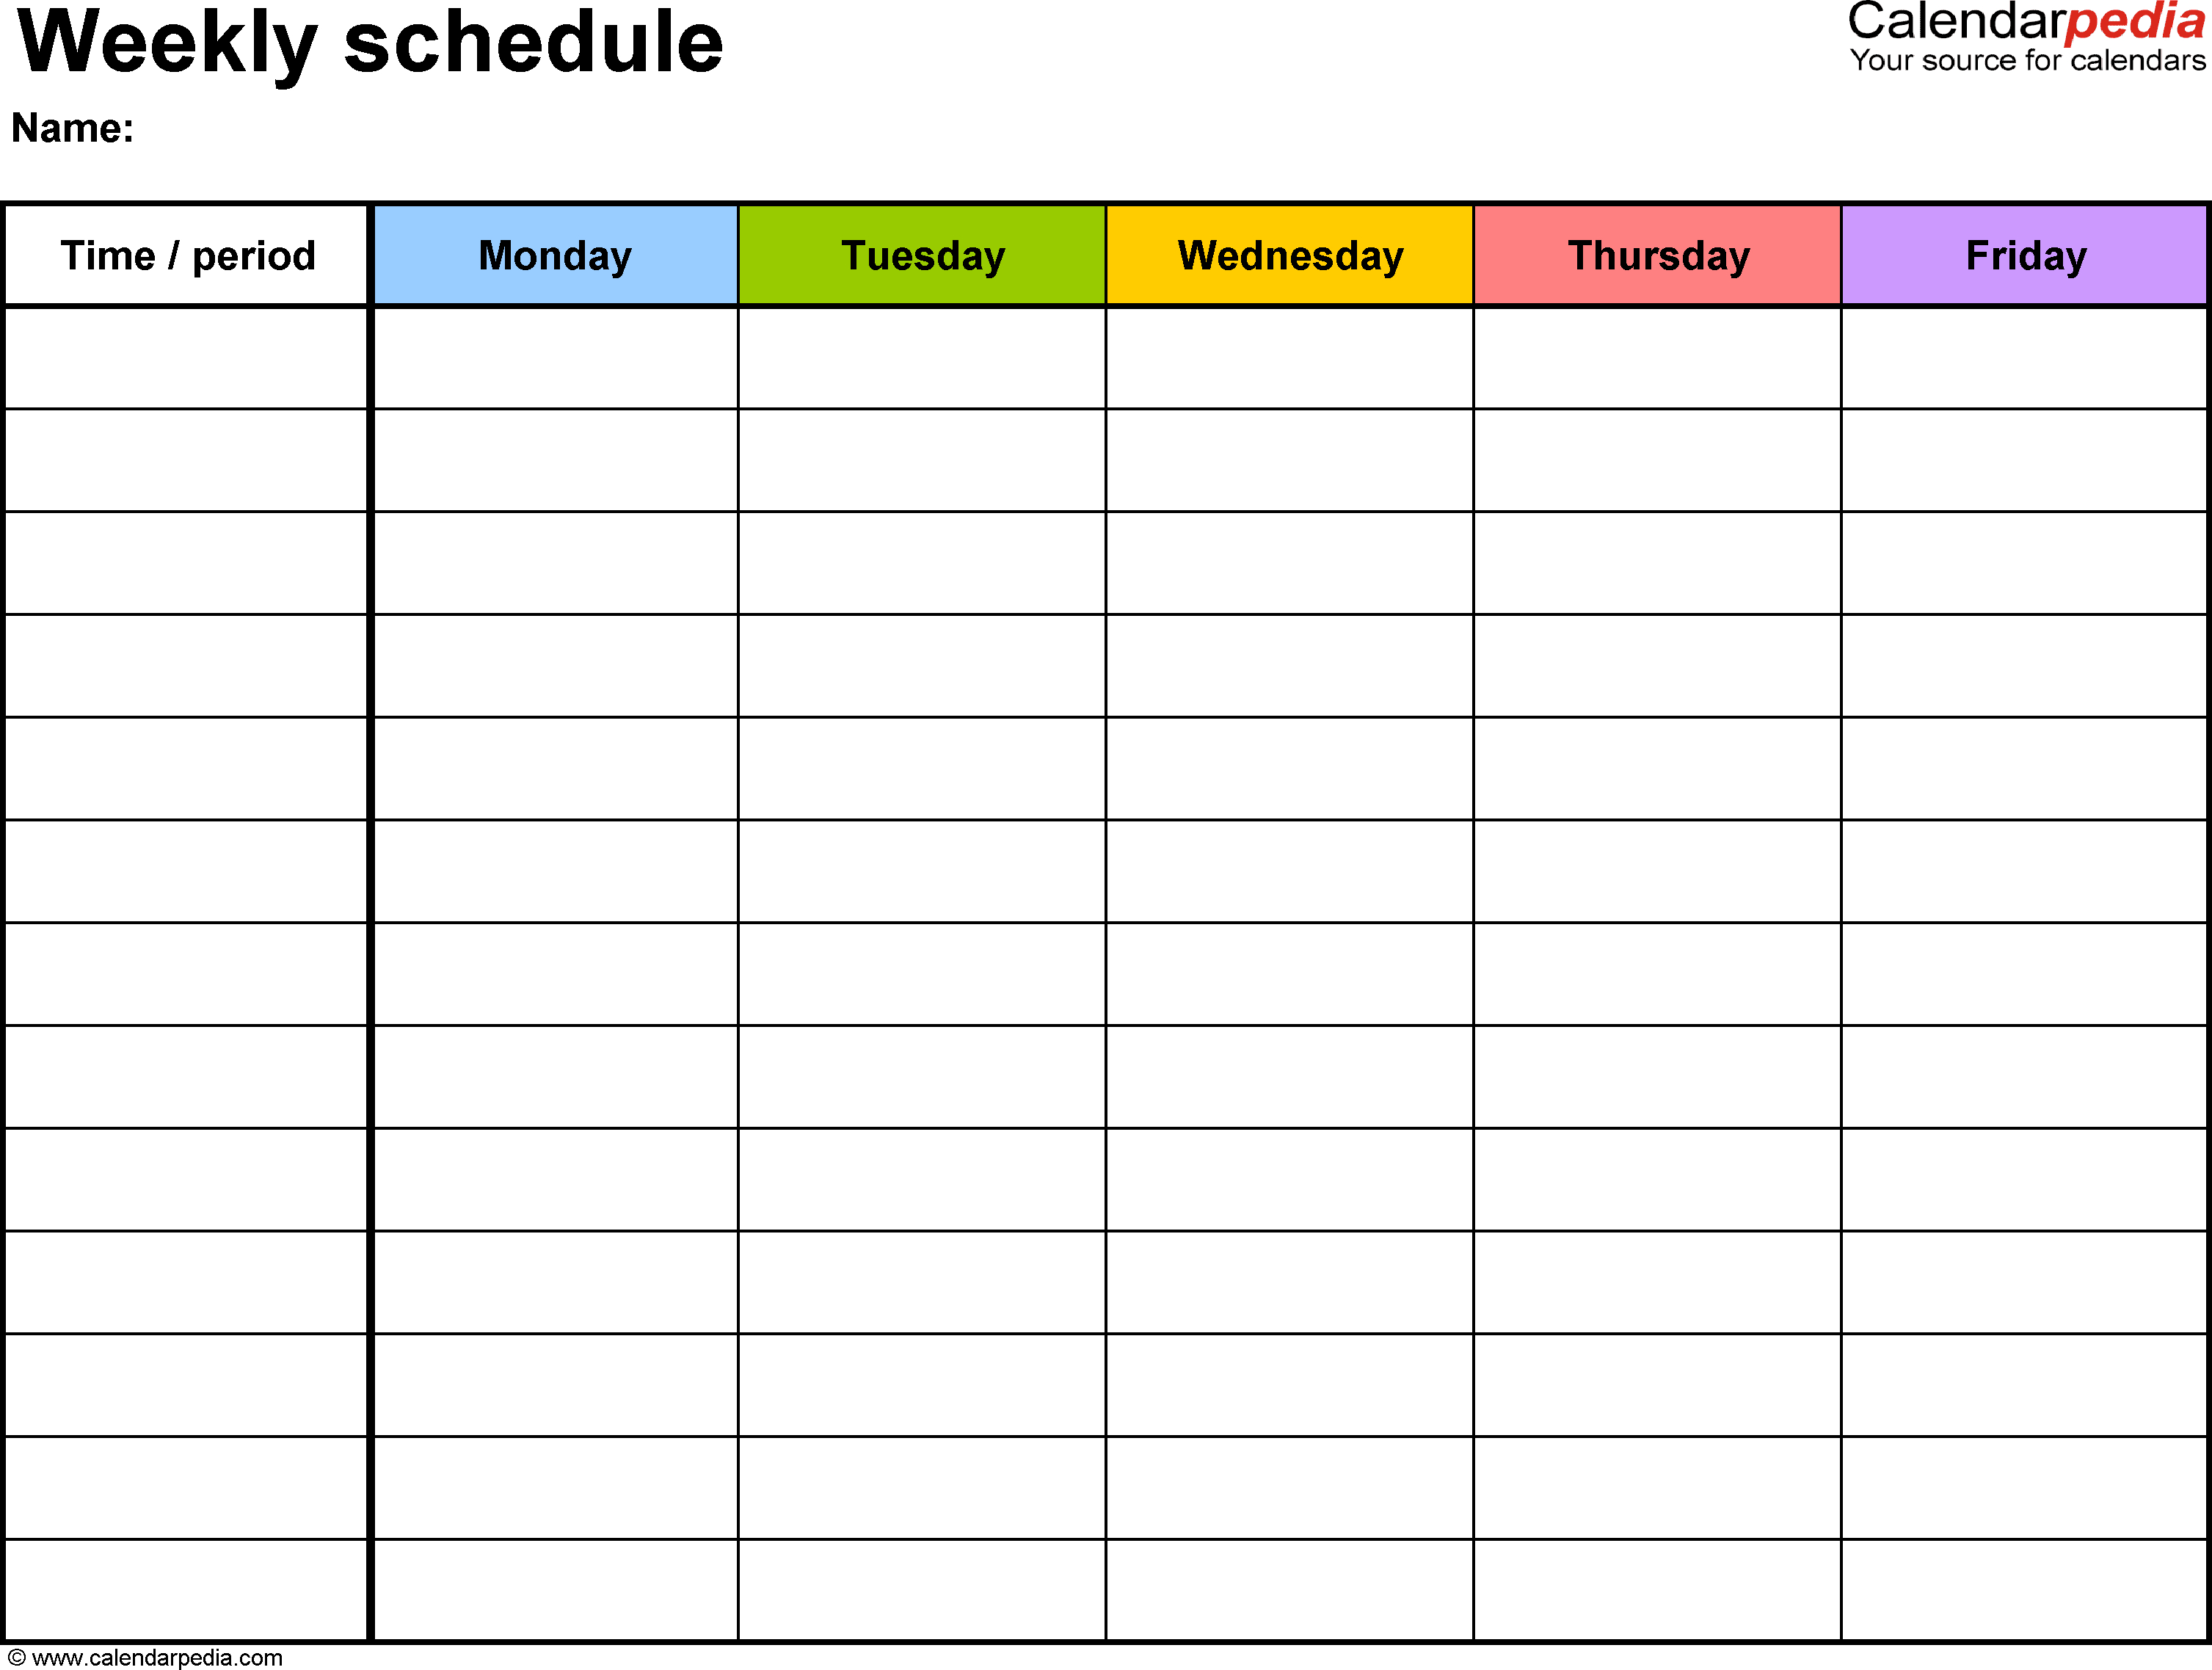 Excel Rota Spreadsheet Within Free Weekly Schedule Templates For Excel  18 Templates